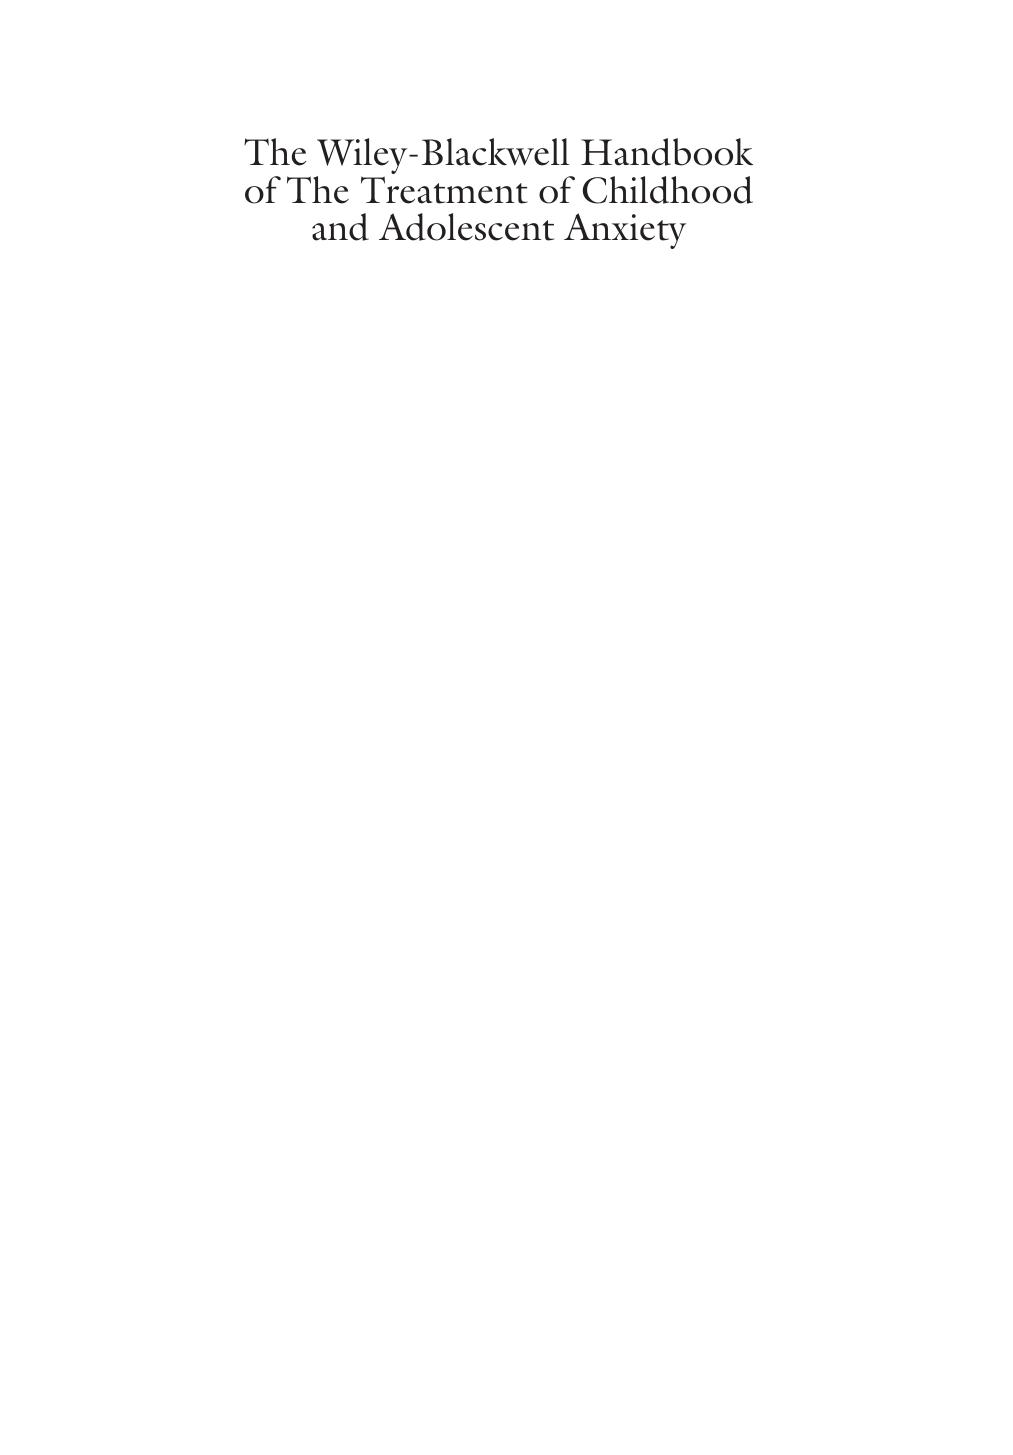 The Wiley-Blackwell Handbook of The Treatment of Childhood and Adolescent Anxiety 2013